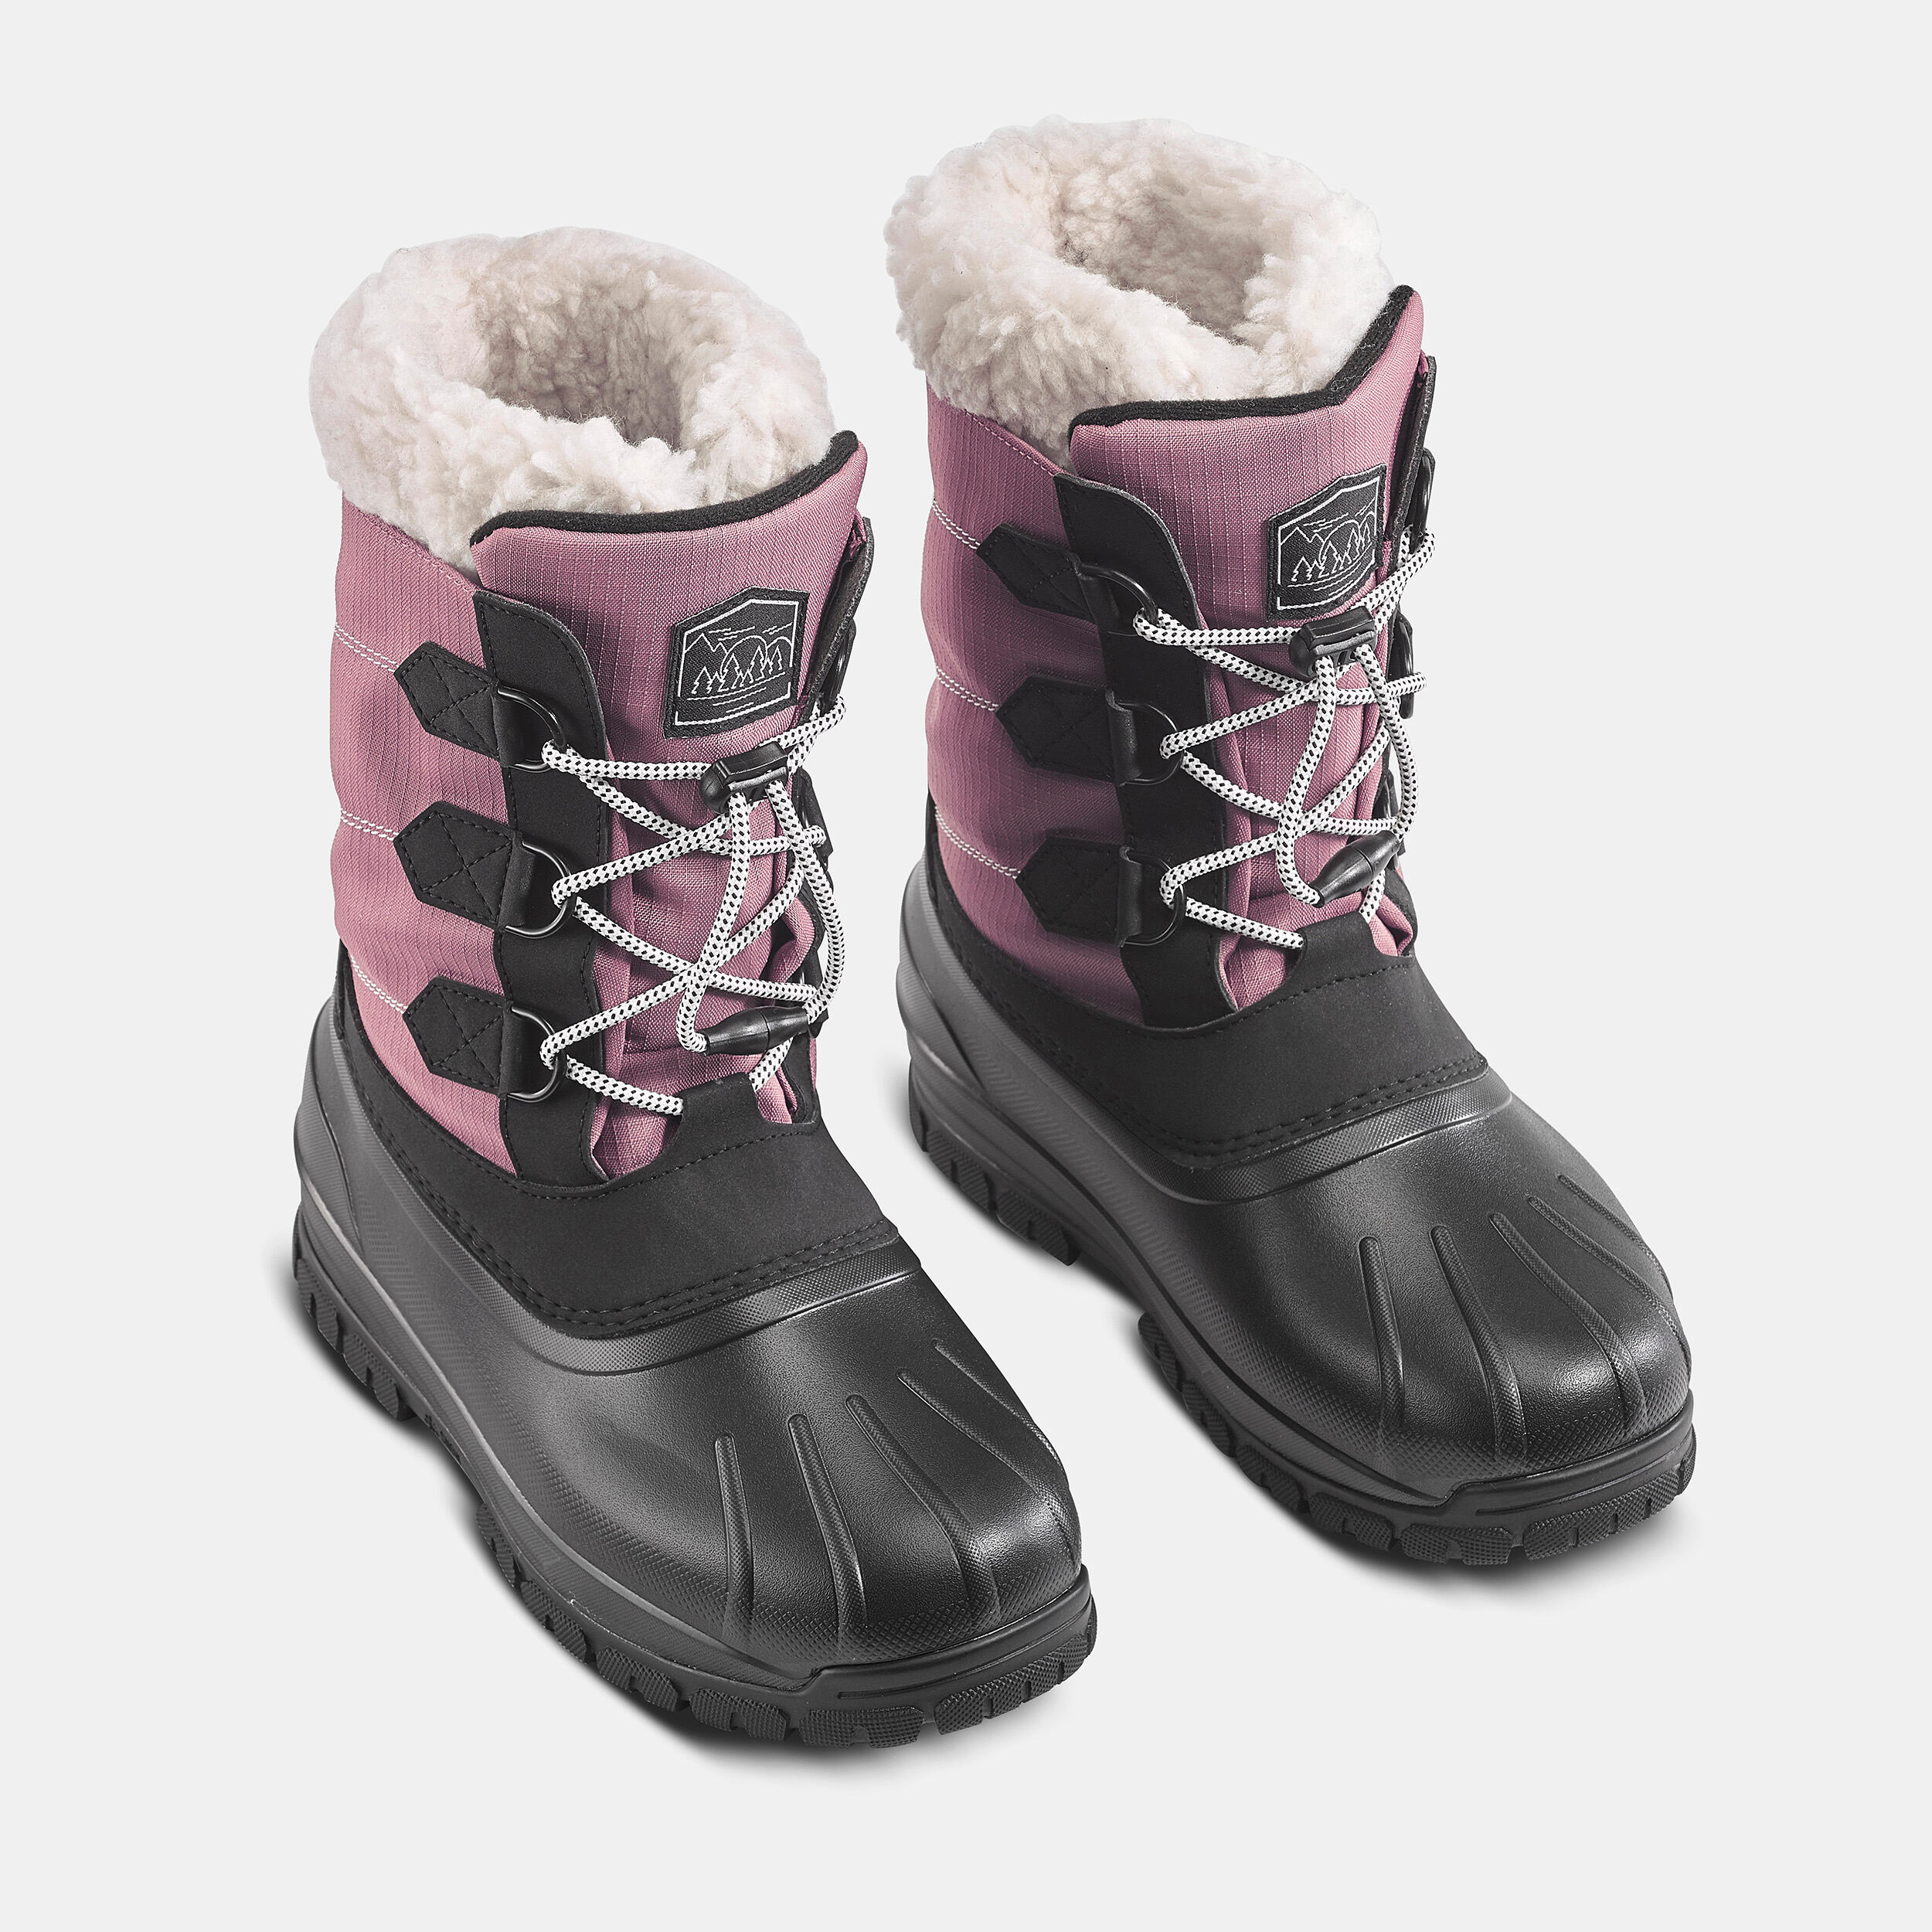 KIDS' WARM AND WATERPROOF HIKING SNOW BOOTS - SH900 - SIZE 11.5 TO 5.5 5/7